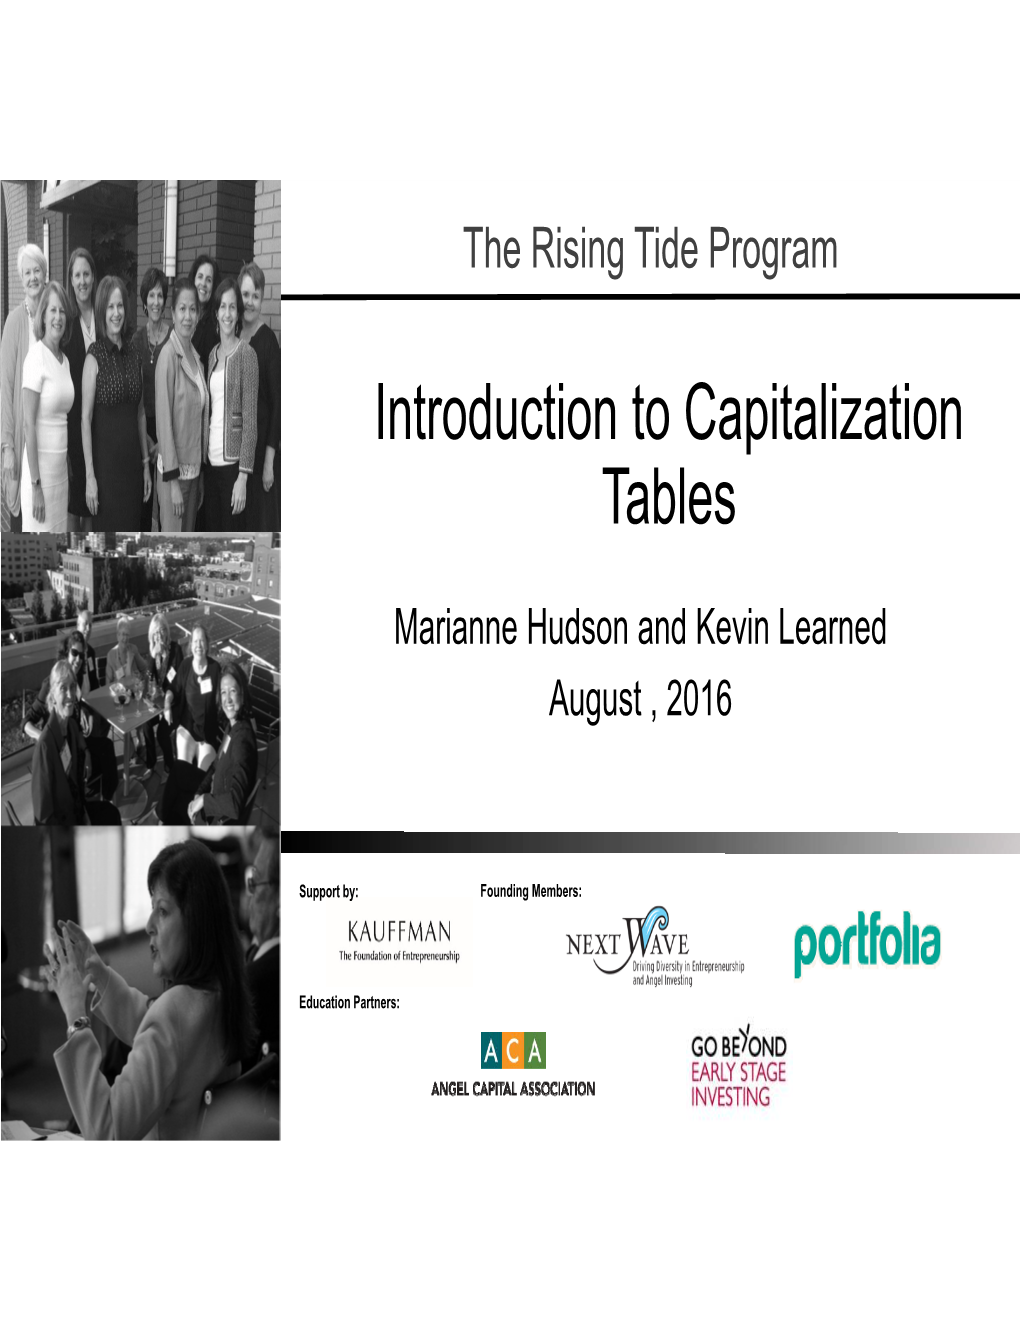 Introduction to Capitalization Tables